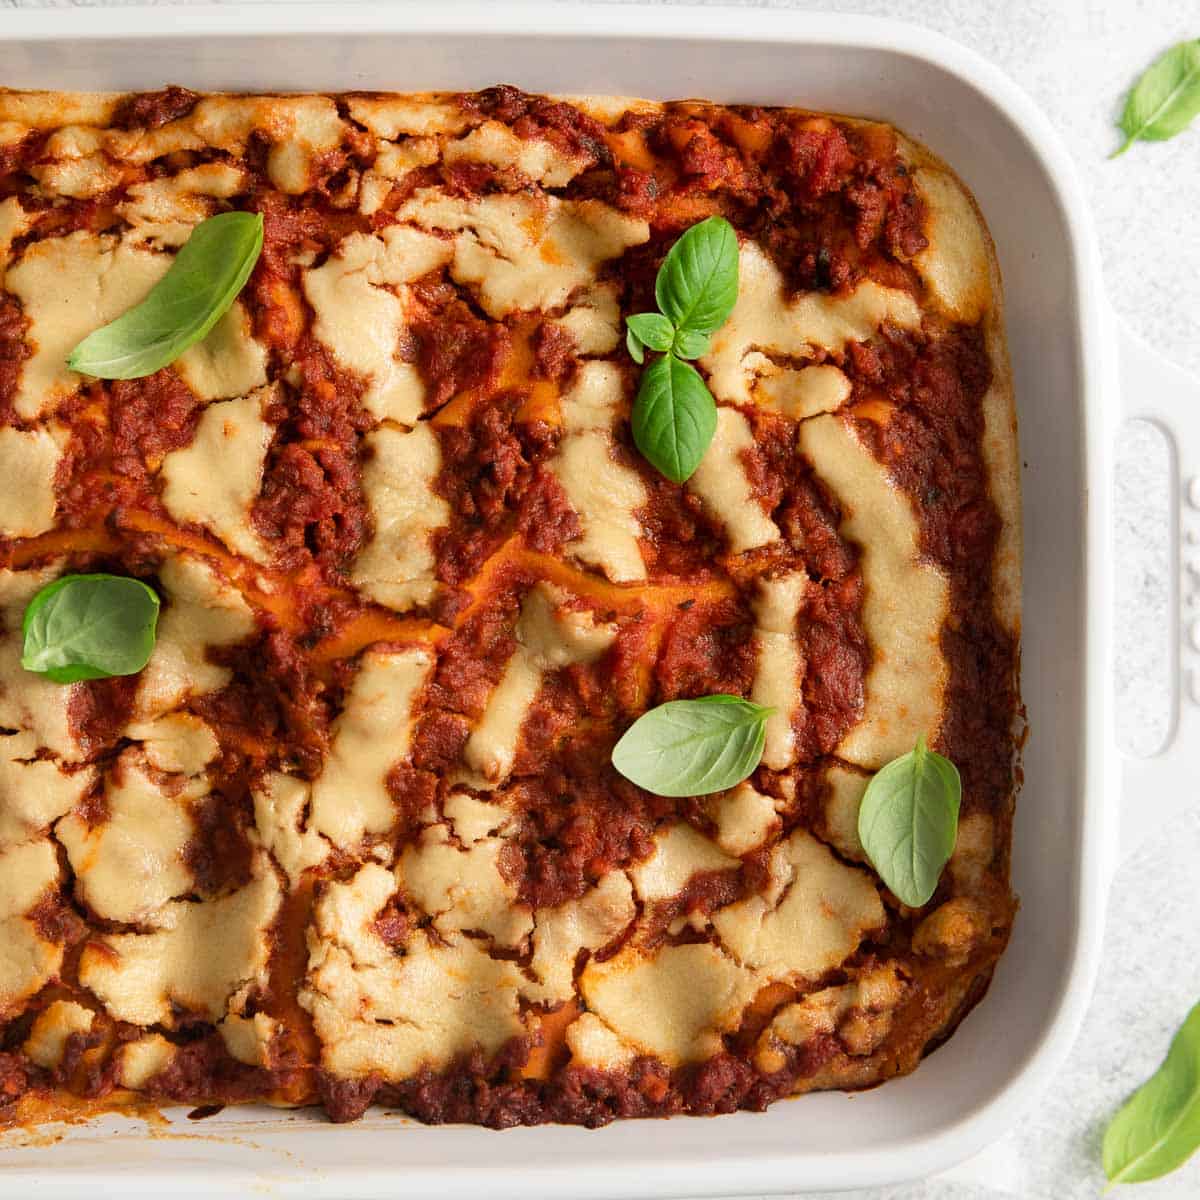 A close-up of dairy-free lasagna in a baking dish